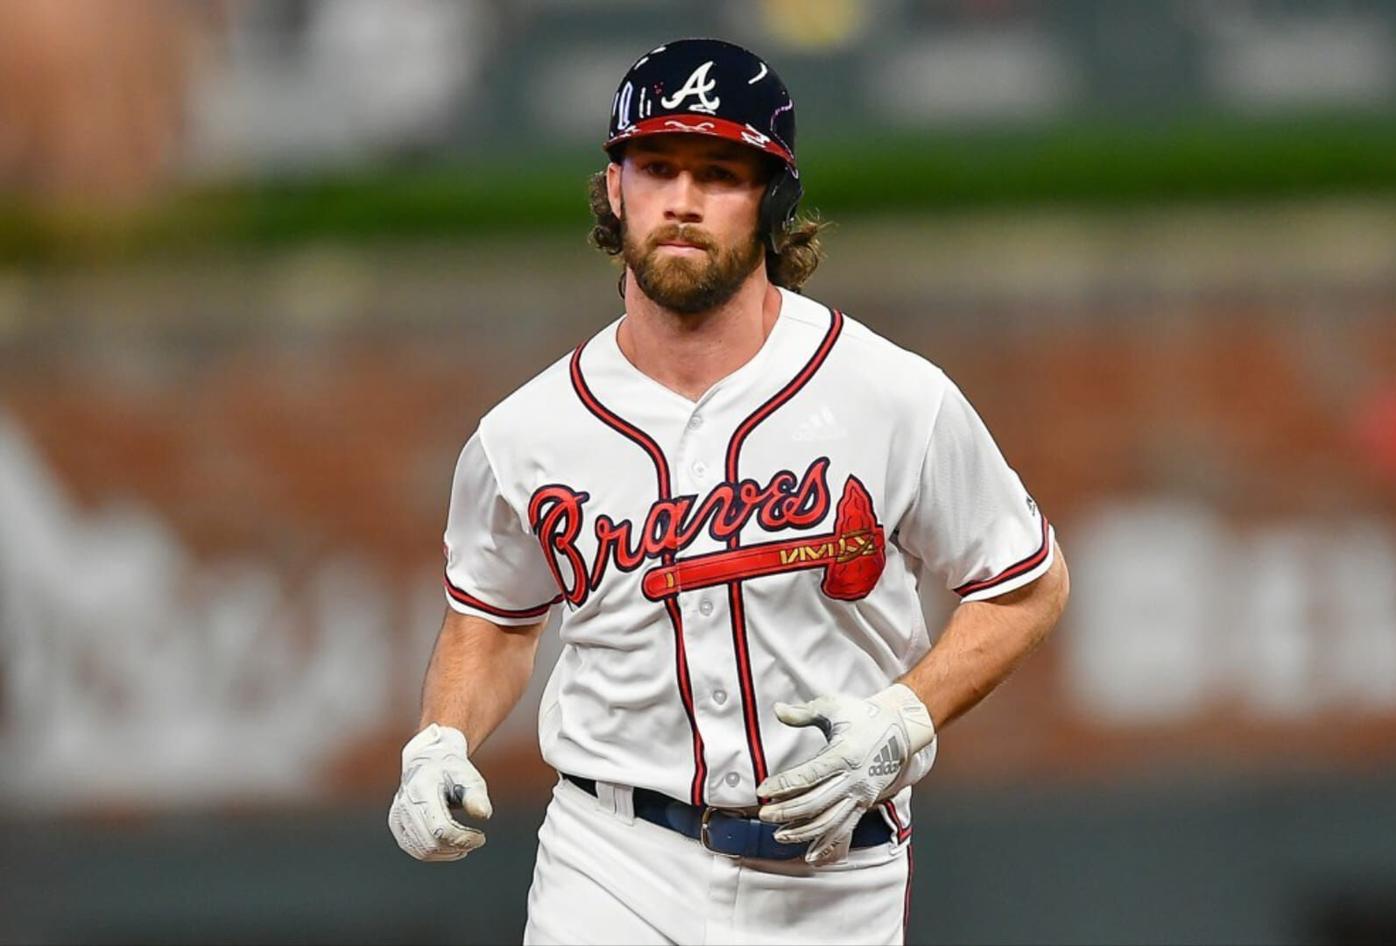 Culberson signs new minor league deal, The Rome News-Tribune